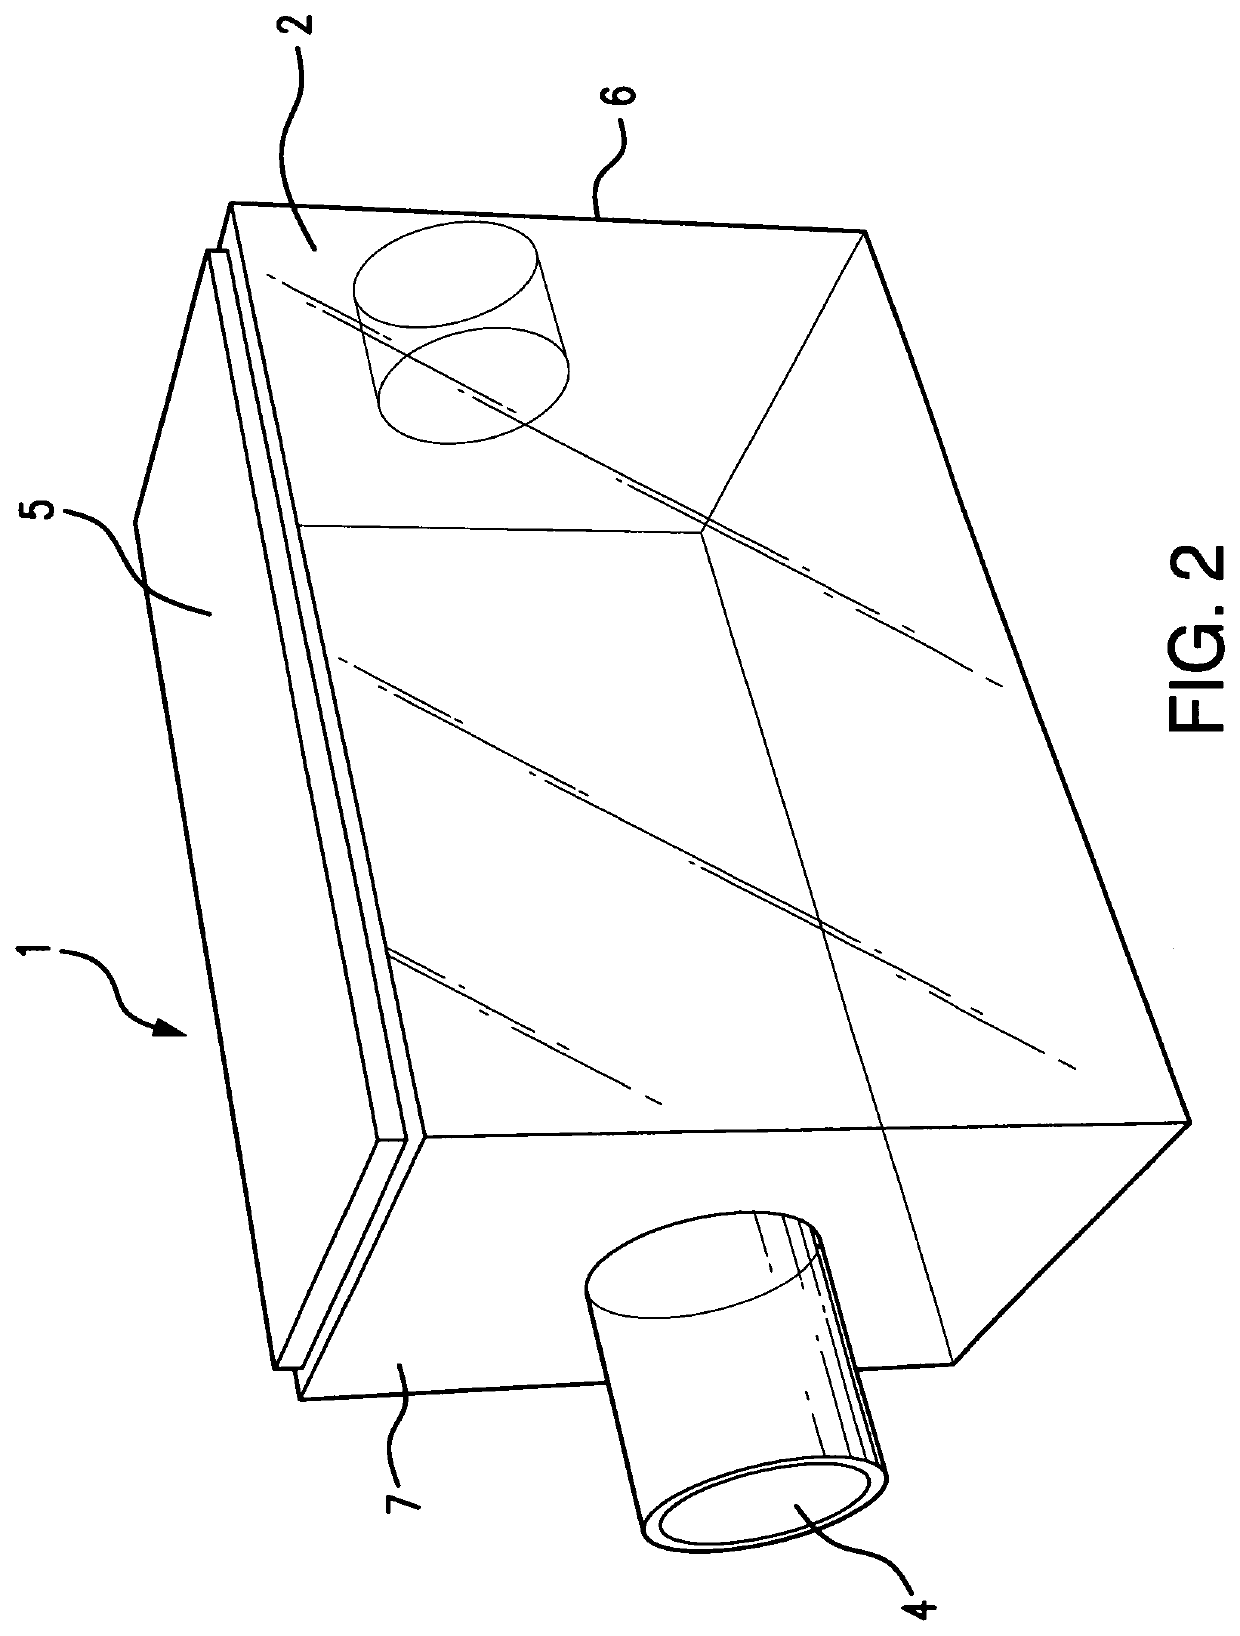 Humidifier for continuous positive airway pressure device